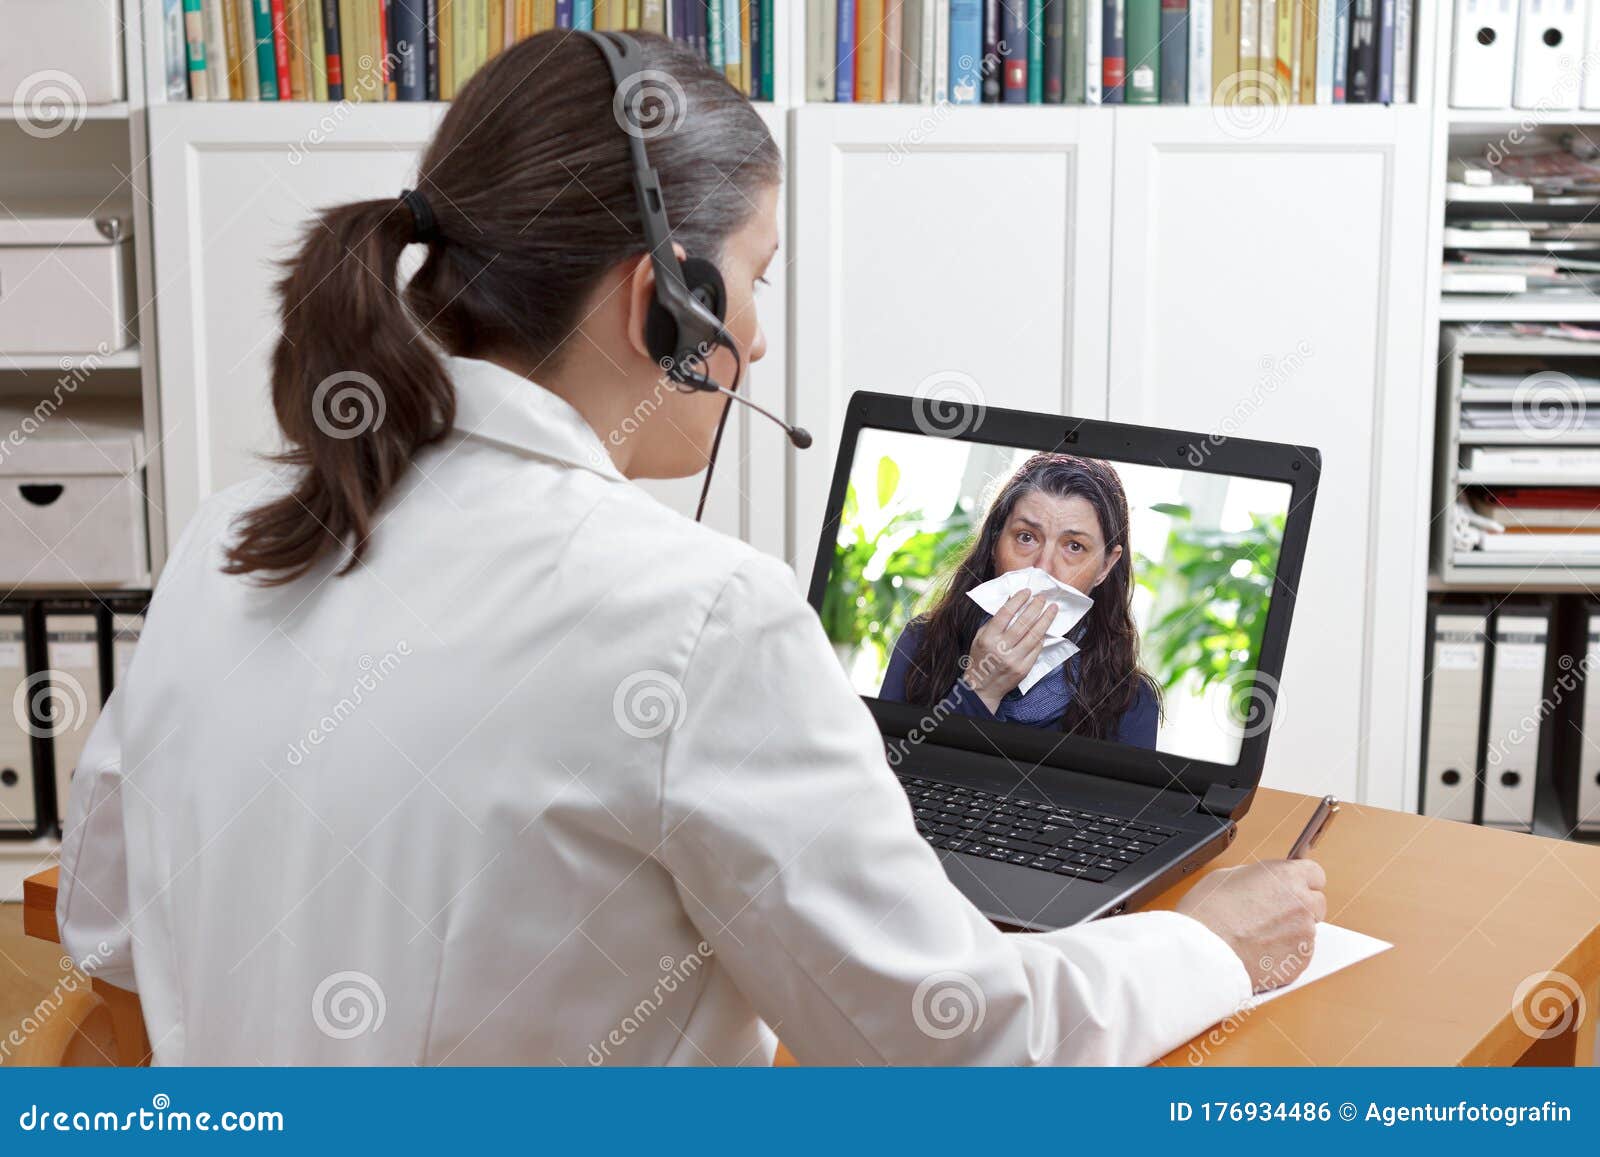 telemedicine concept: doctor or pharmacist during a video consult with a patient with a virus infection.